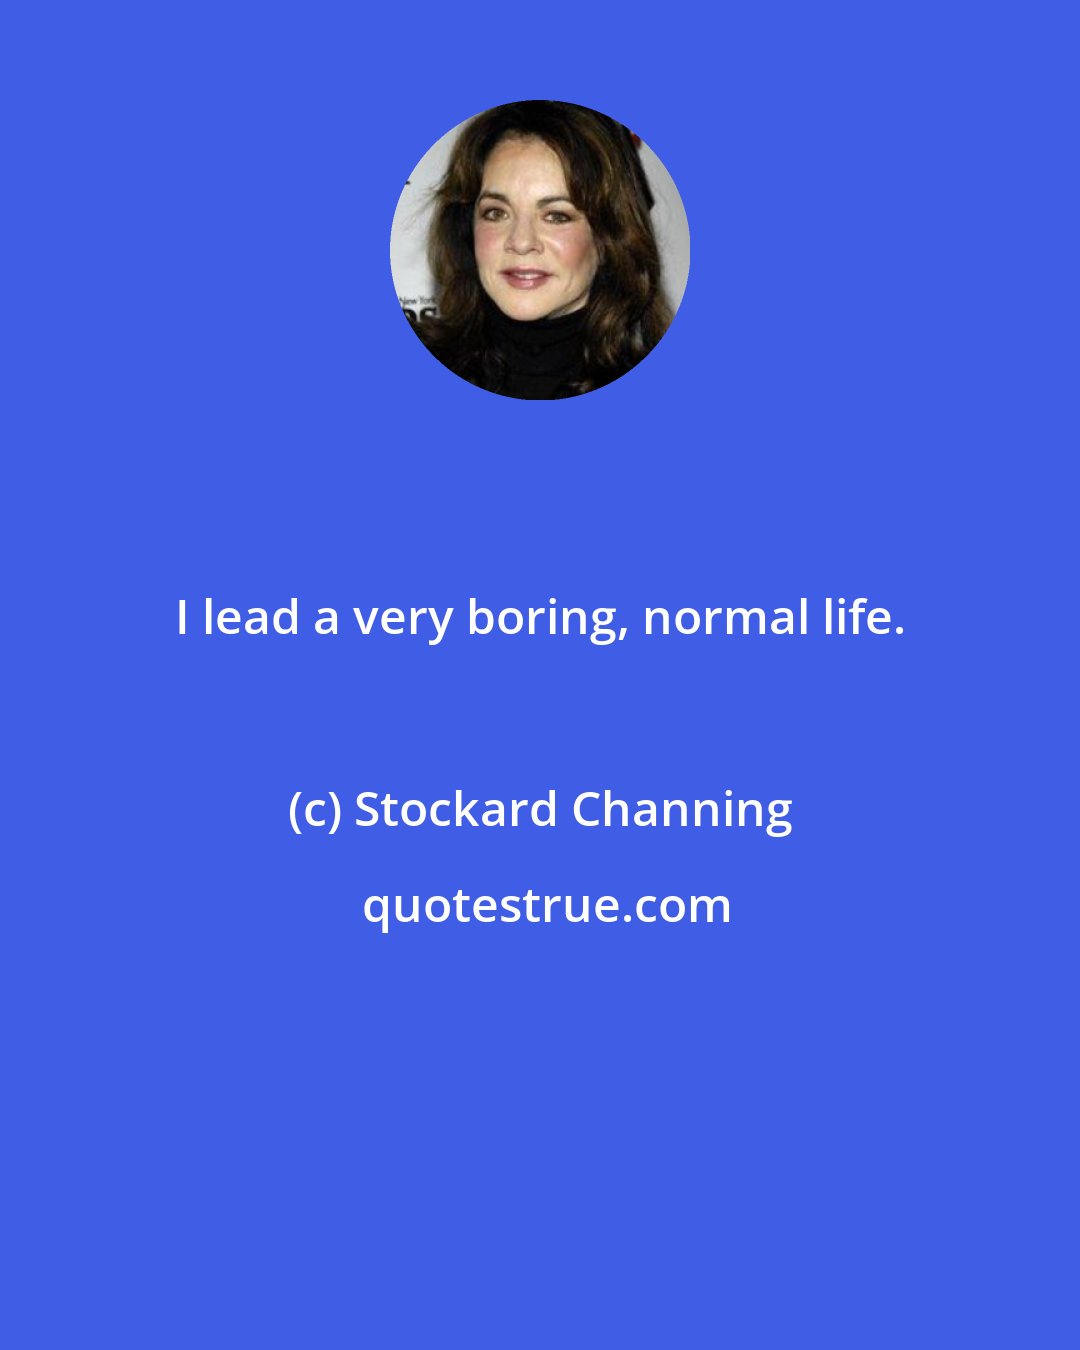 Stockard Channing: I lead a very boring, normal life.